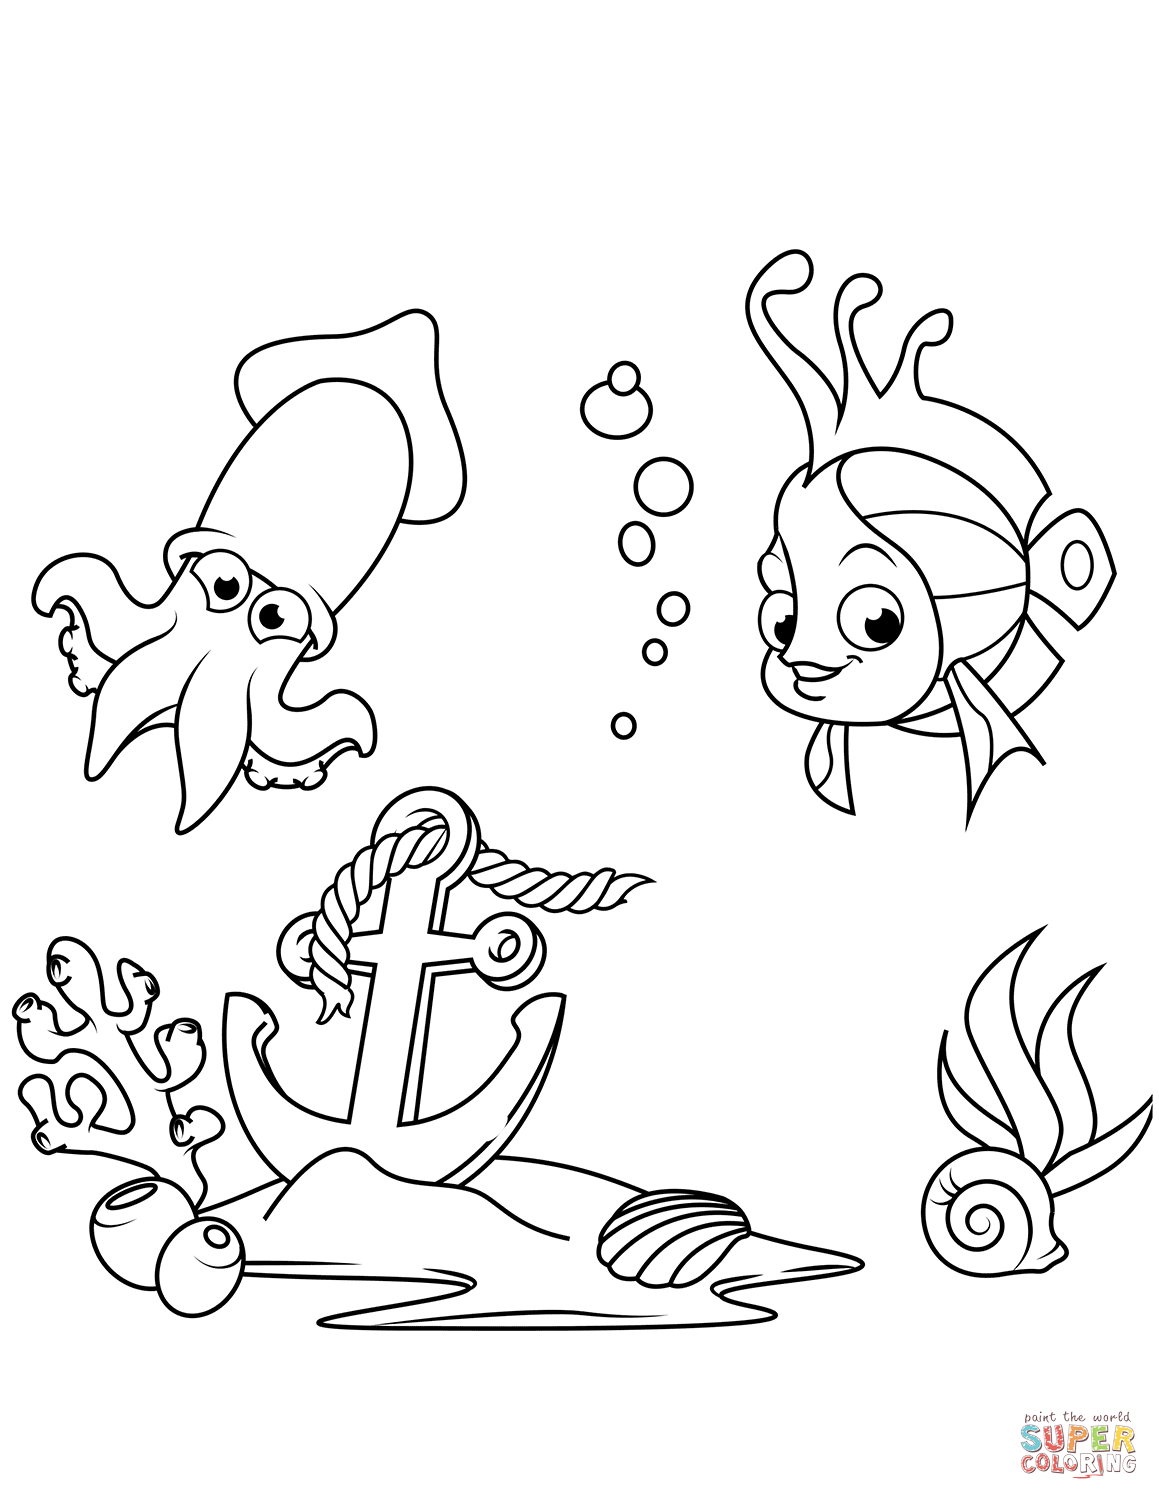 Lost Anchor on the Bottom of the Sea coloring page | Free ...